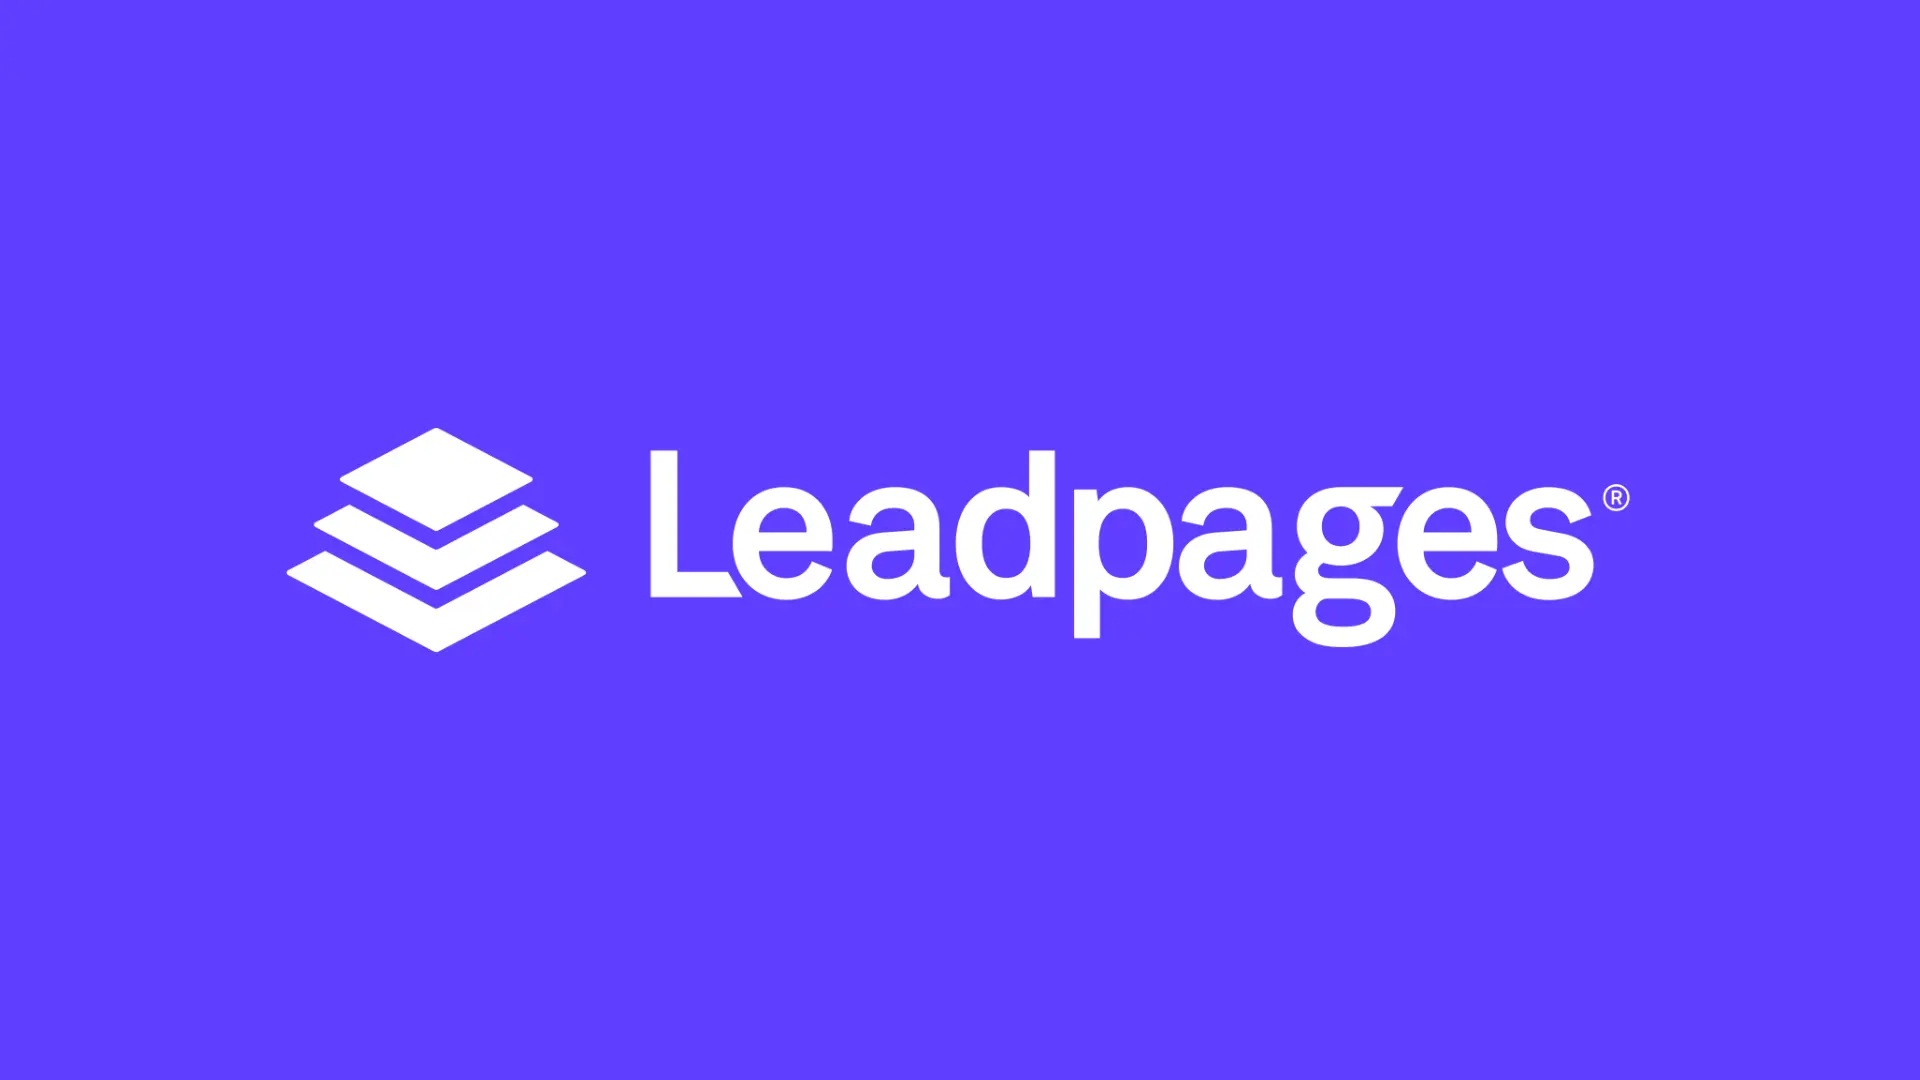 Leadpages brand